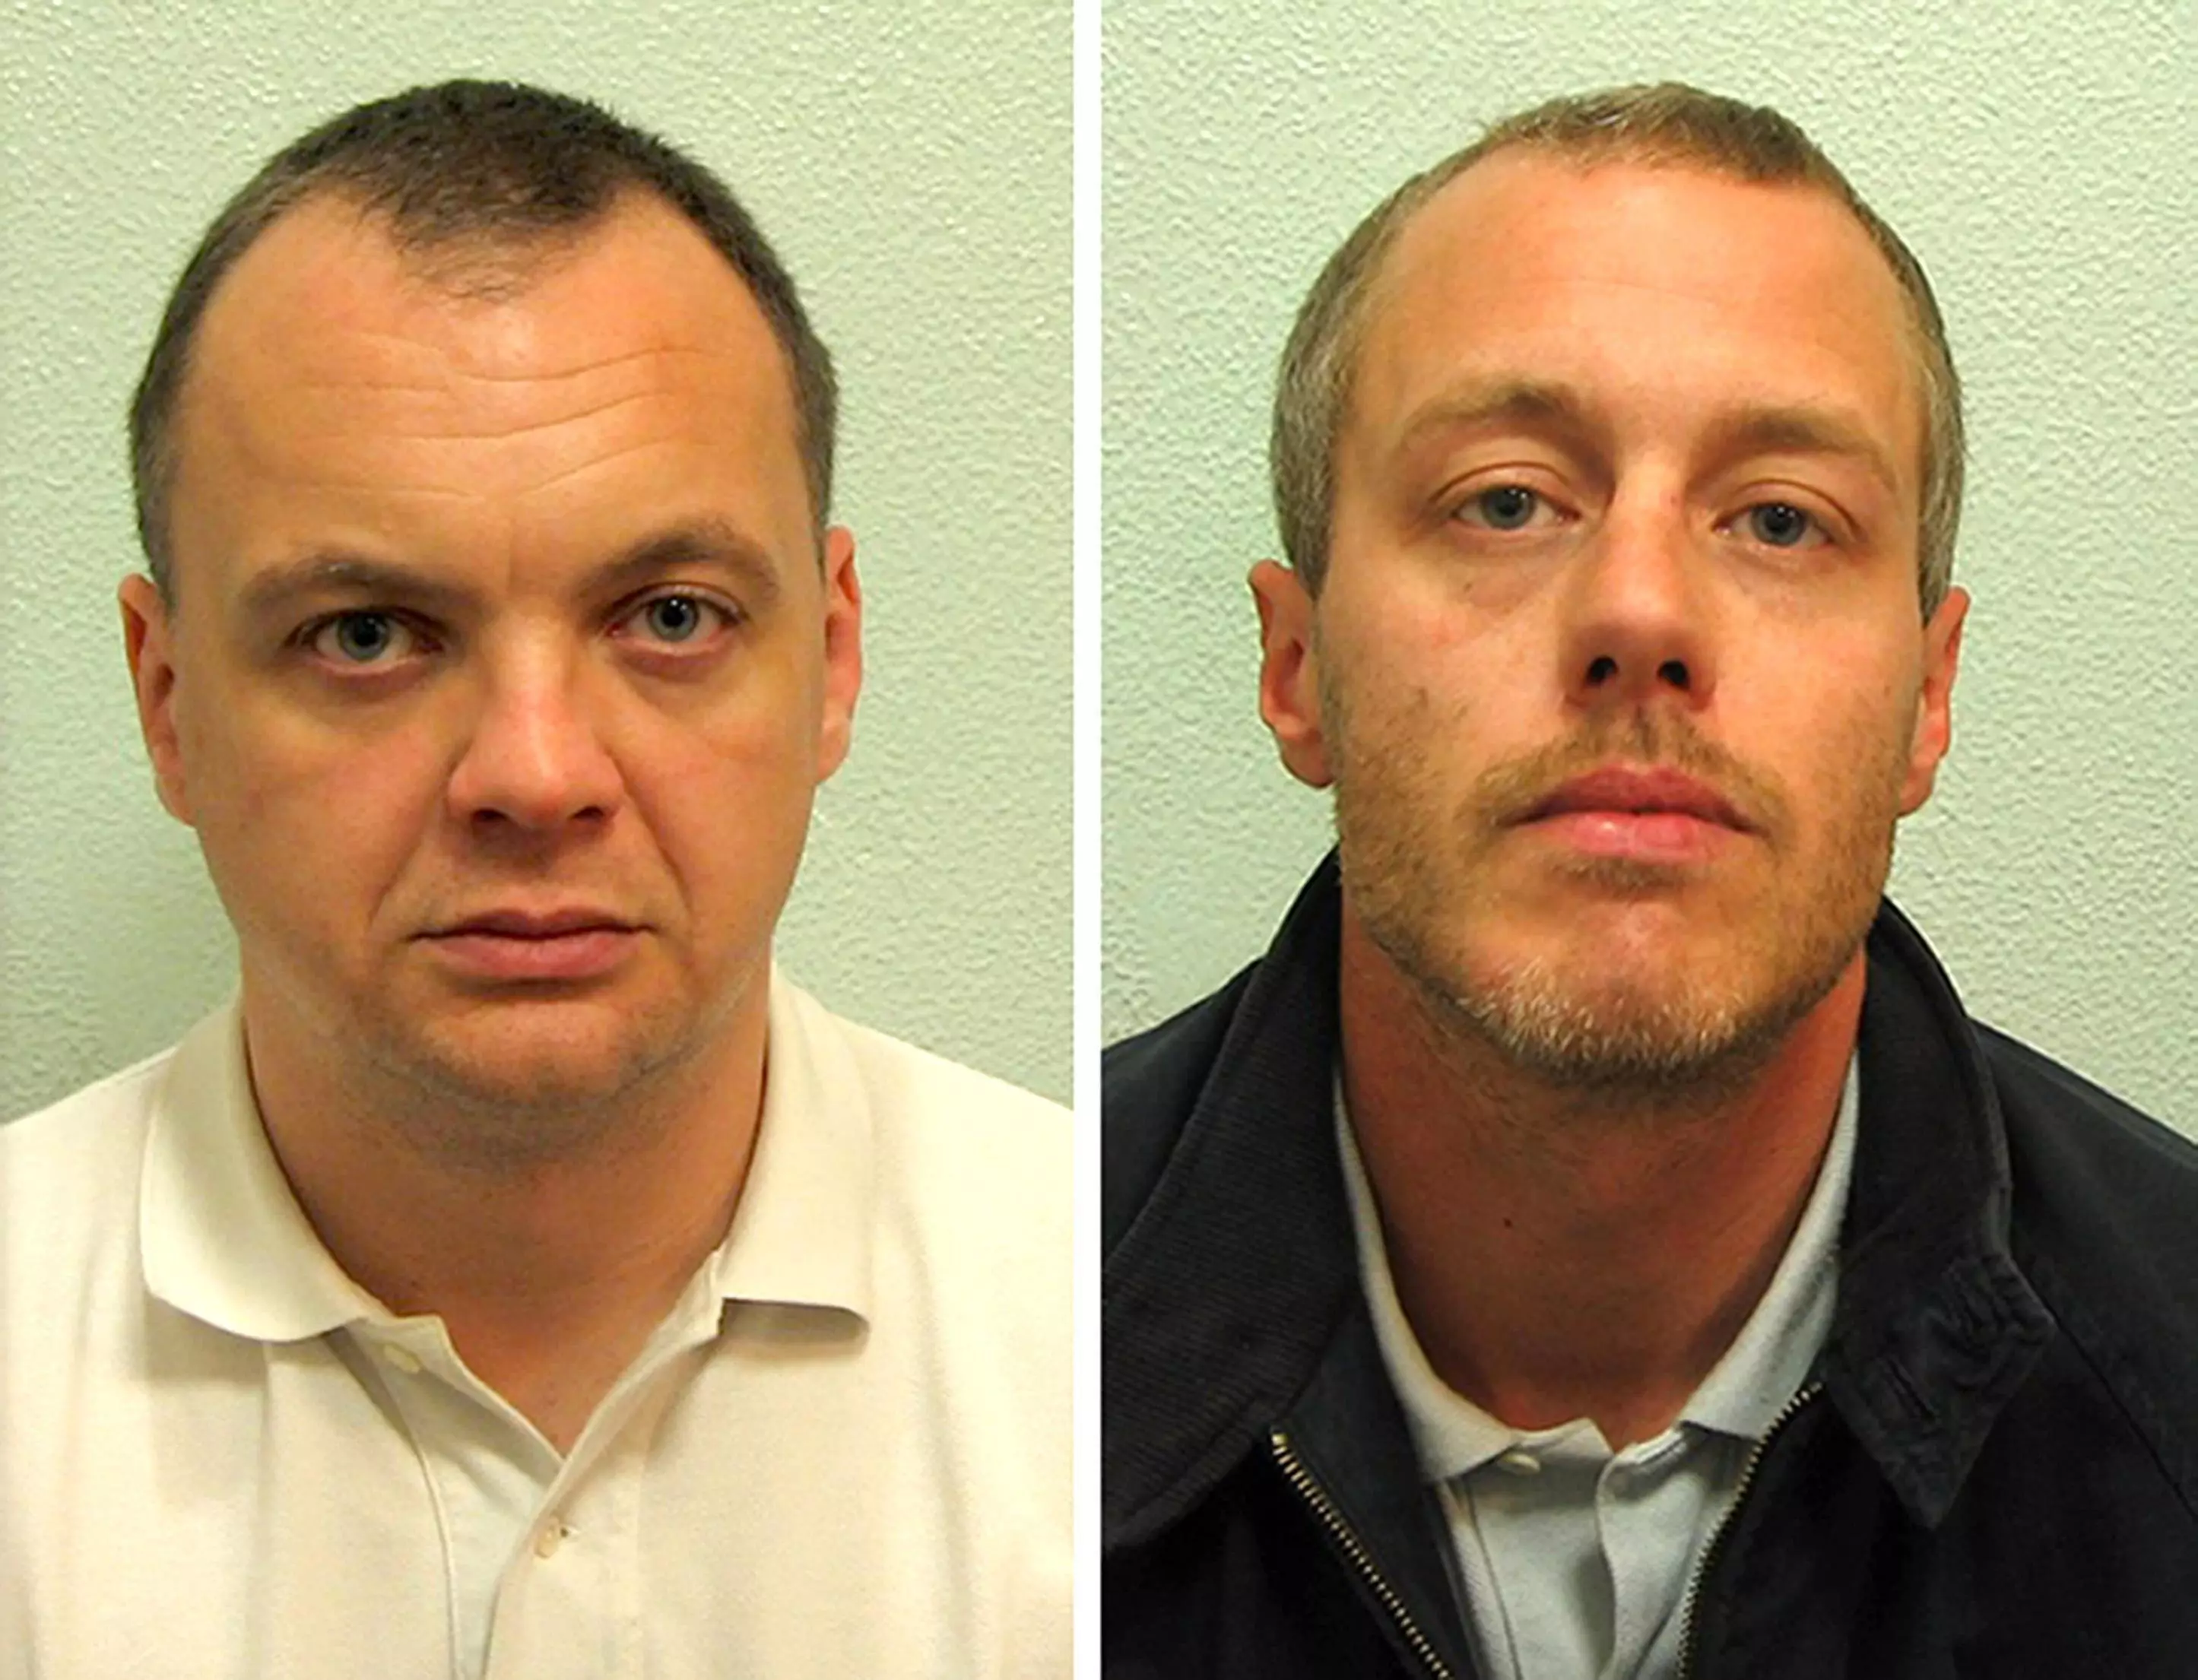 Gary Dobson (left) and David Norris were convicted of the racist murder of Stephen Lawrence.